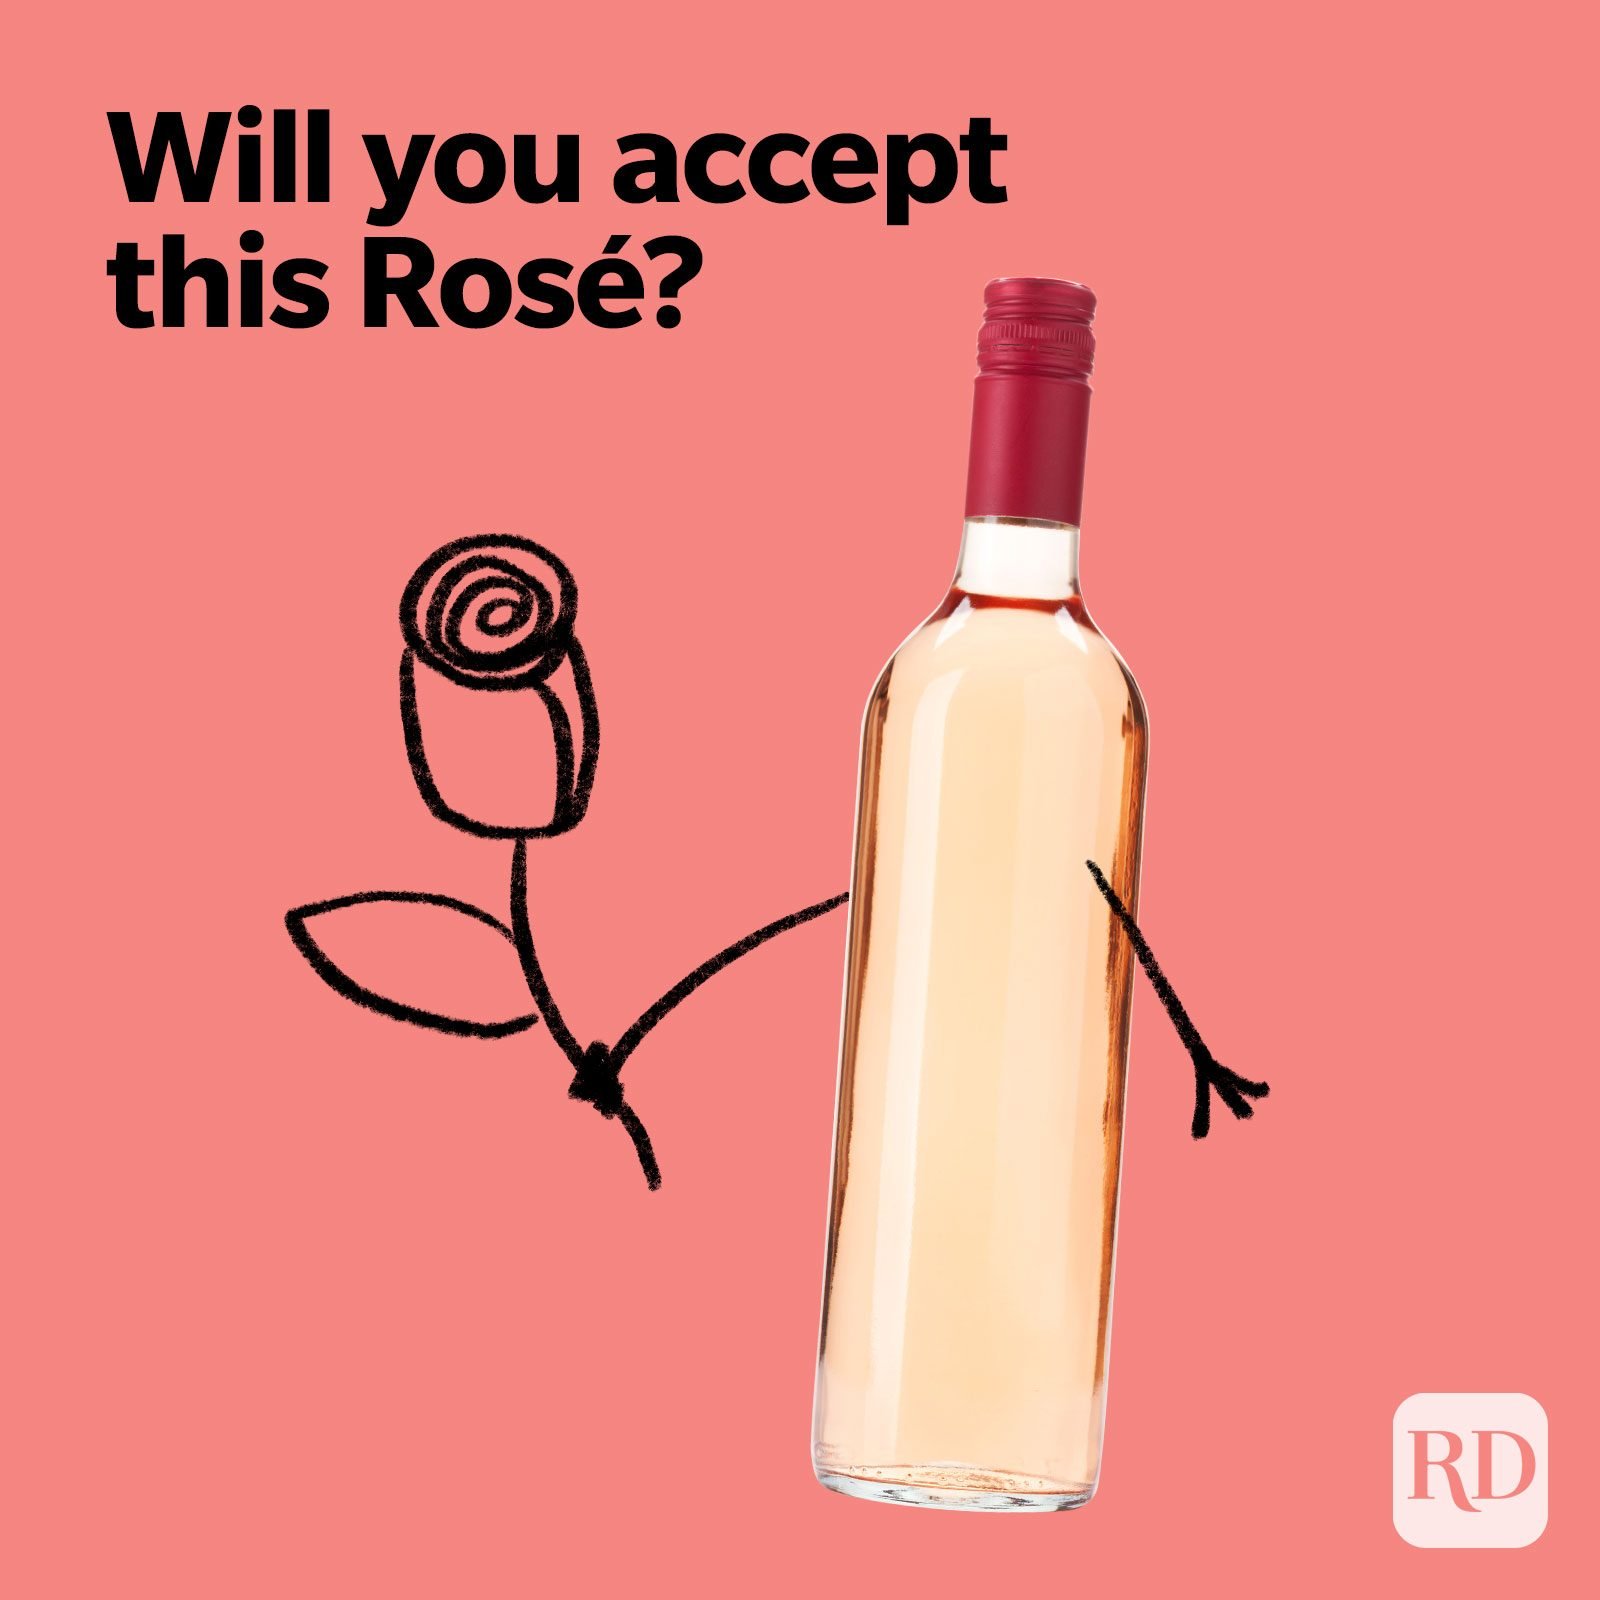 https://www.rd.com/wp-content/uploads/2021/04/wine-puns_will-you-accept-this-rose-1.jpg